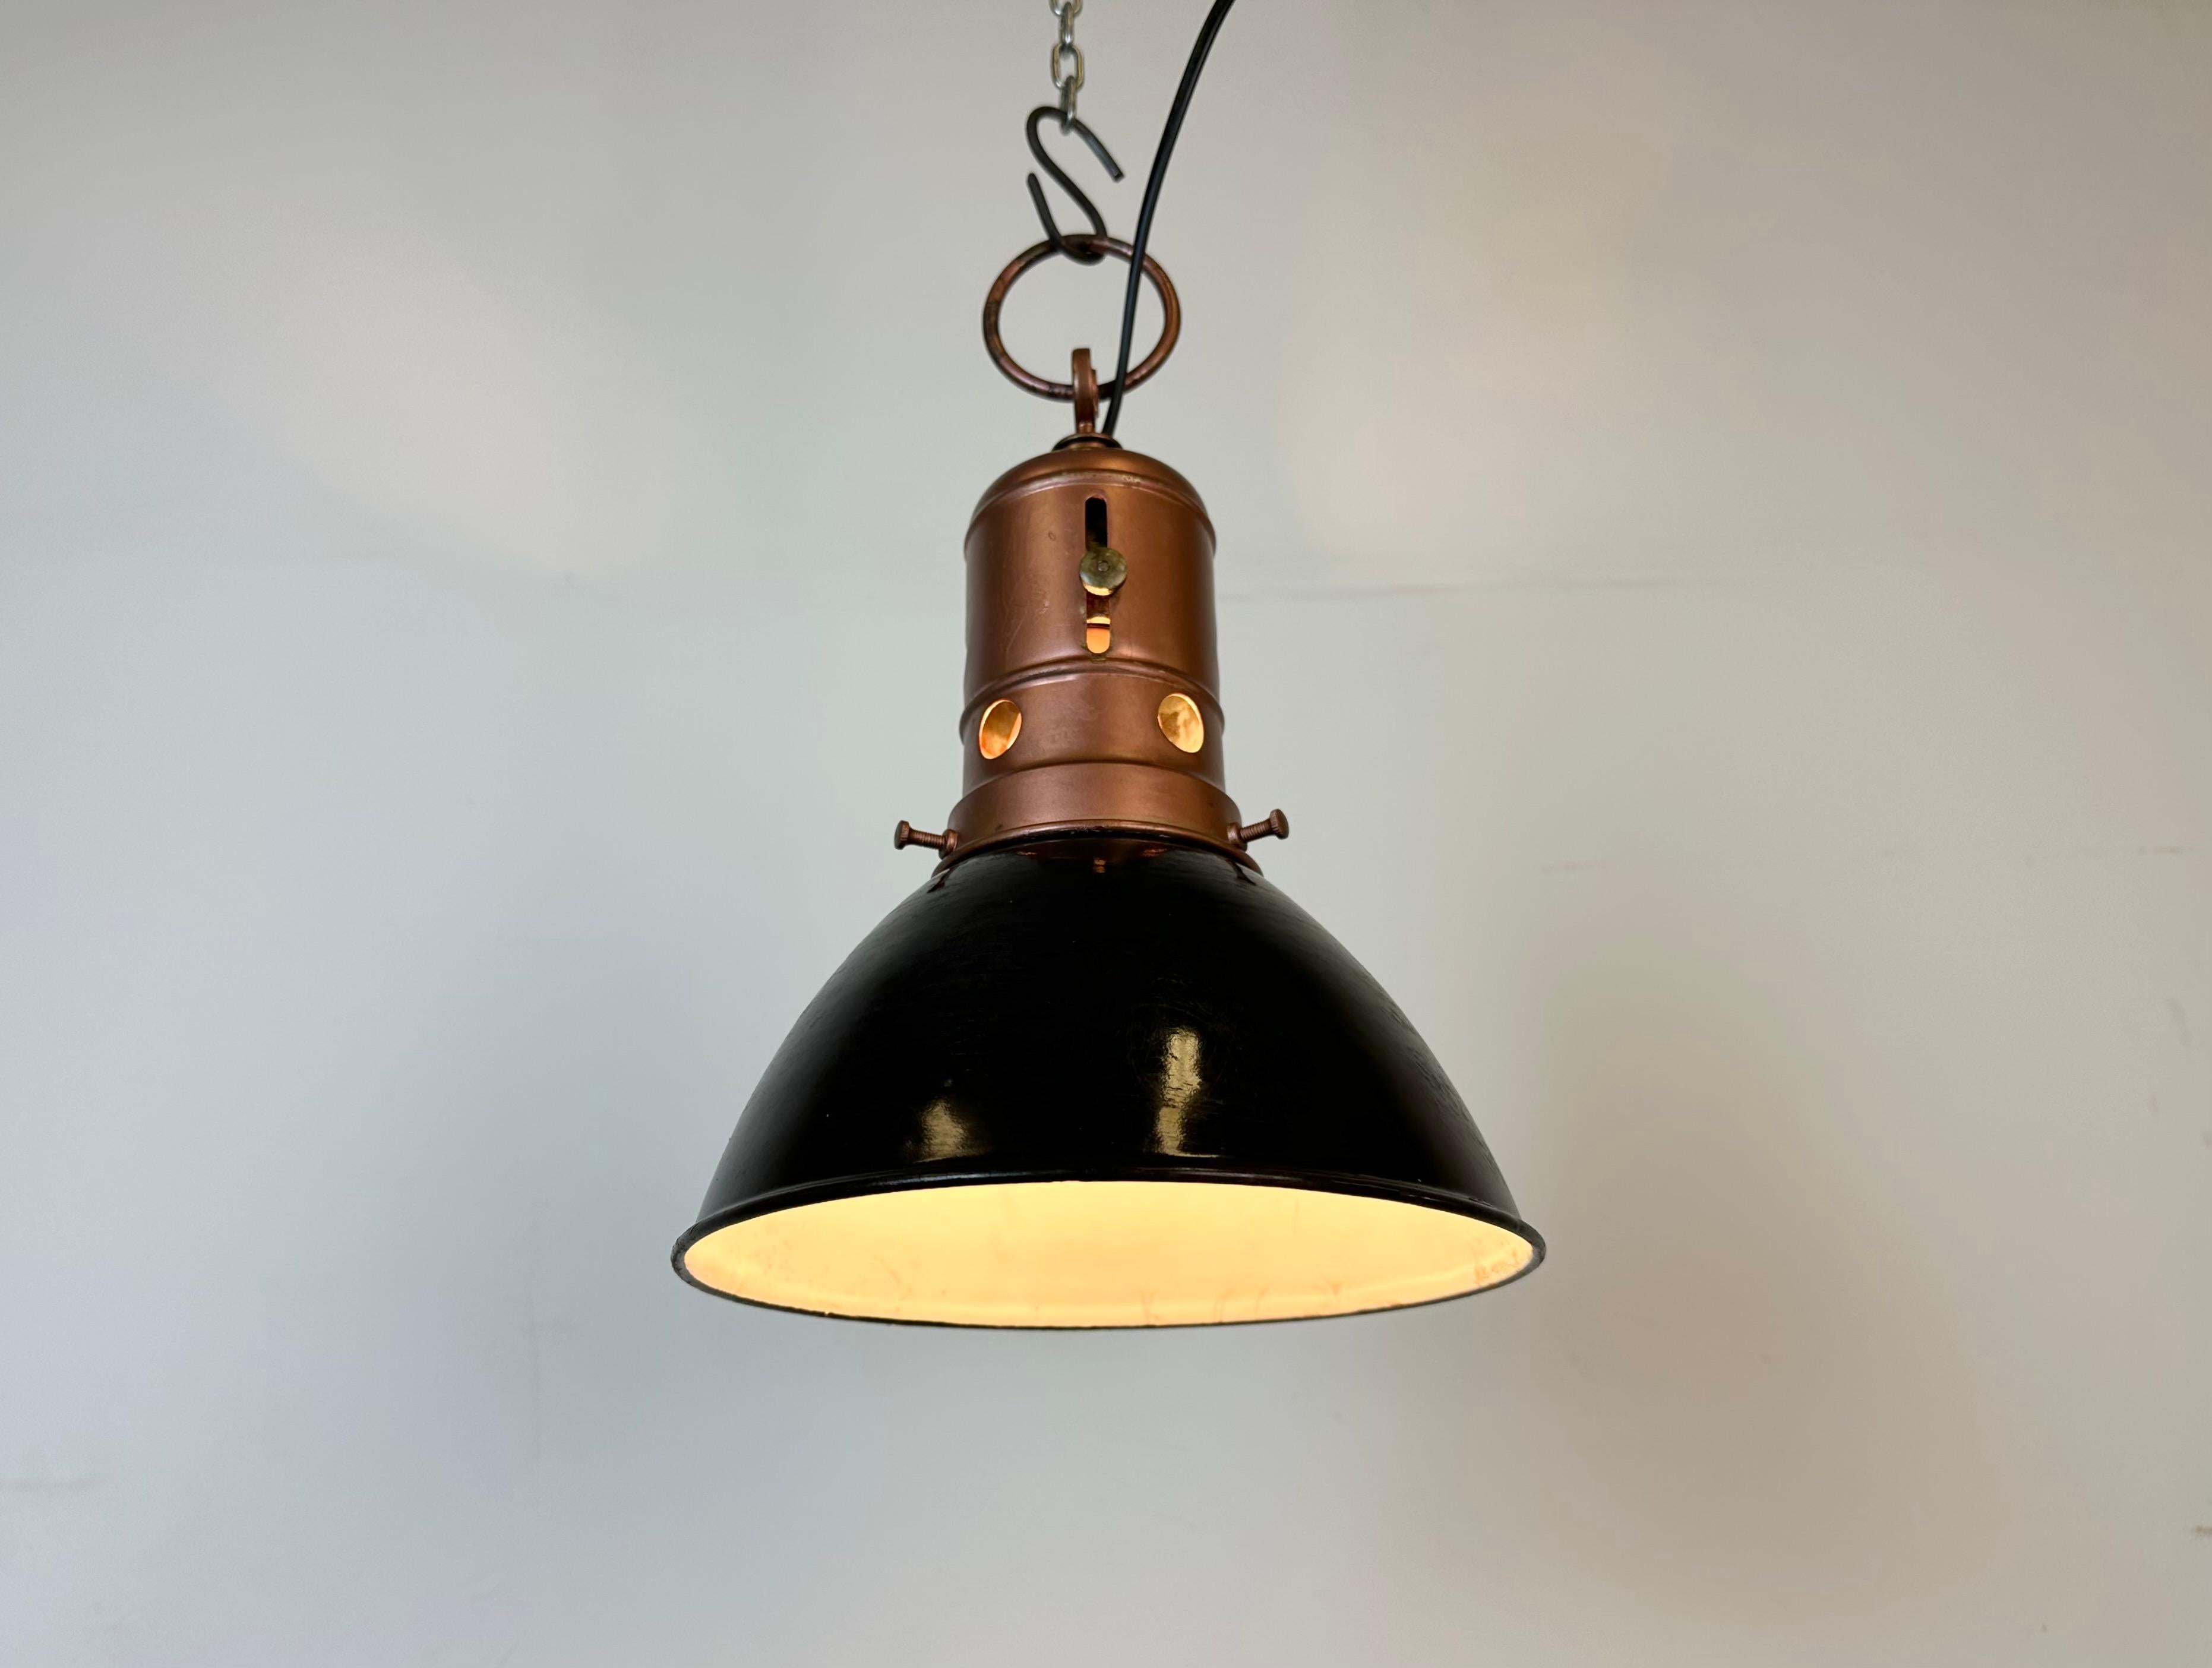 Industrial Italian Black Enamel Factory Lamp with Iron Top, 1950s For Sale 7